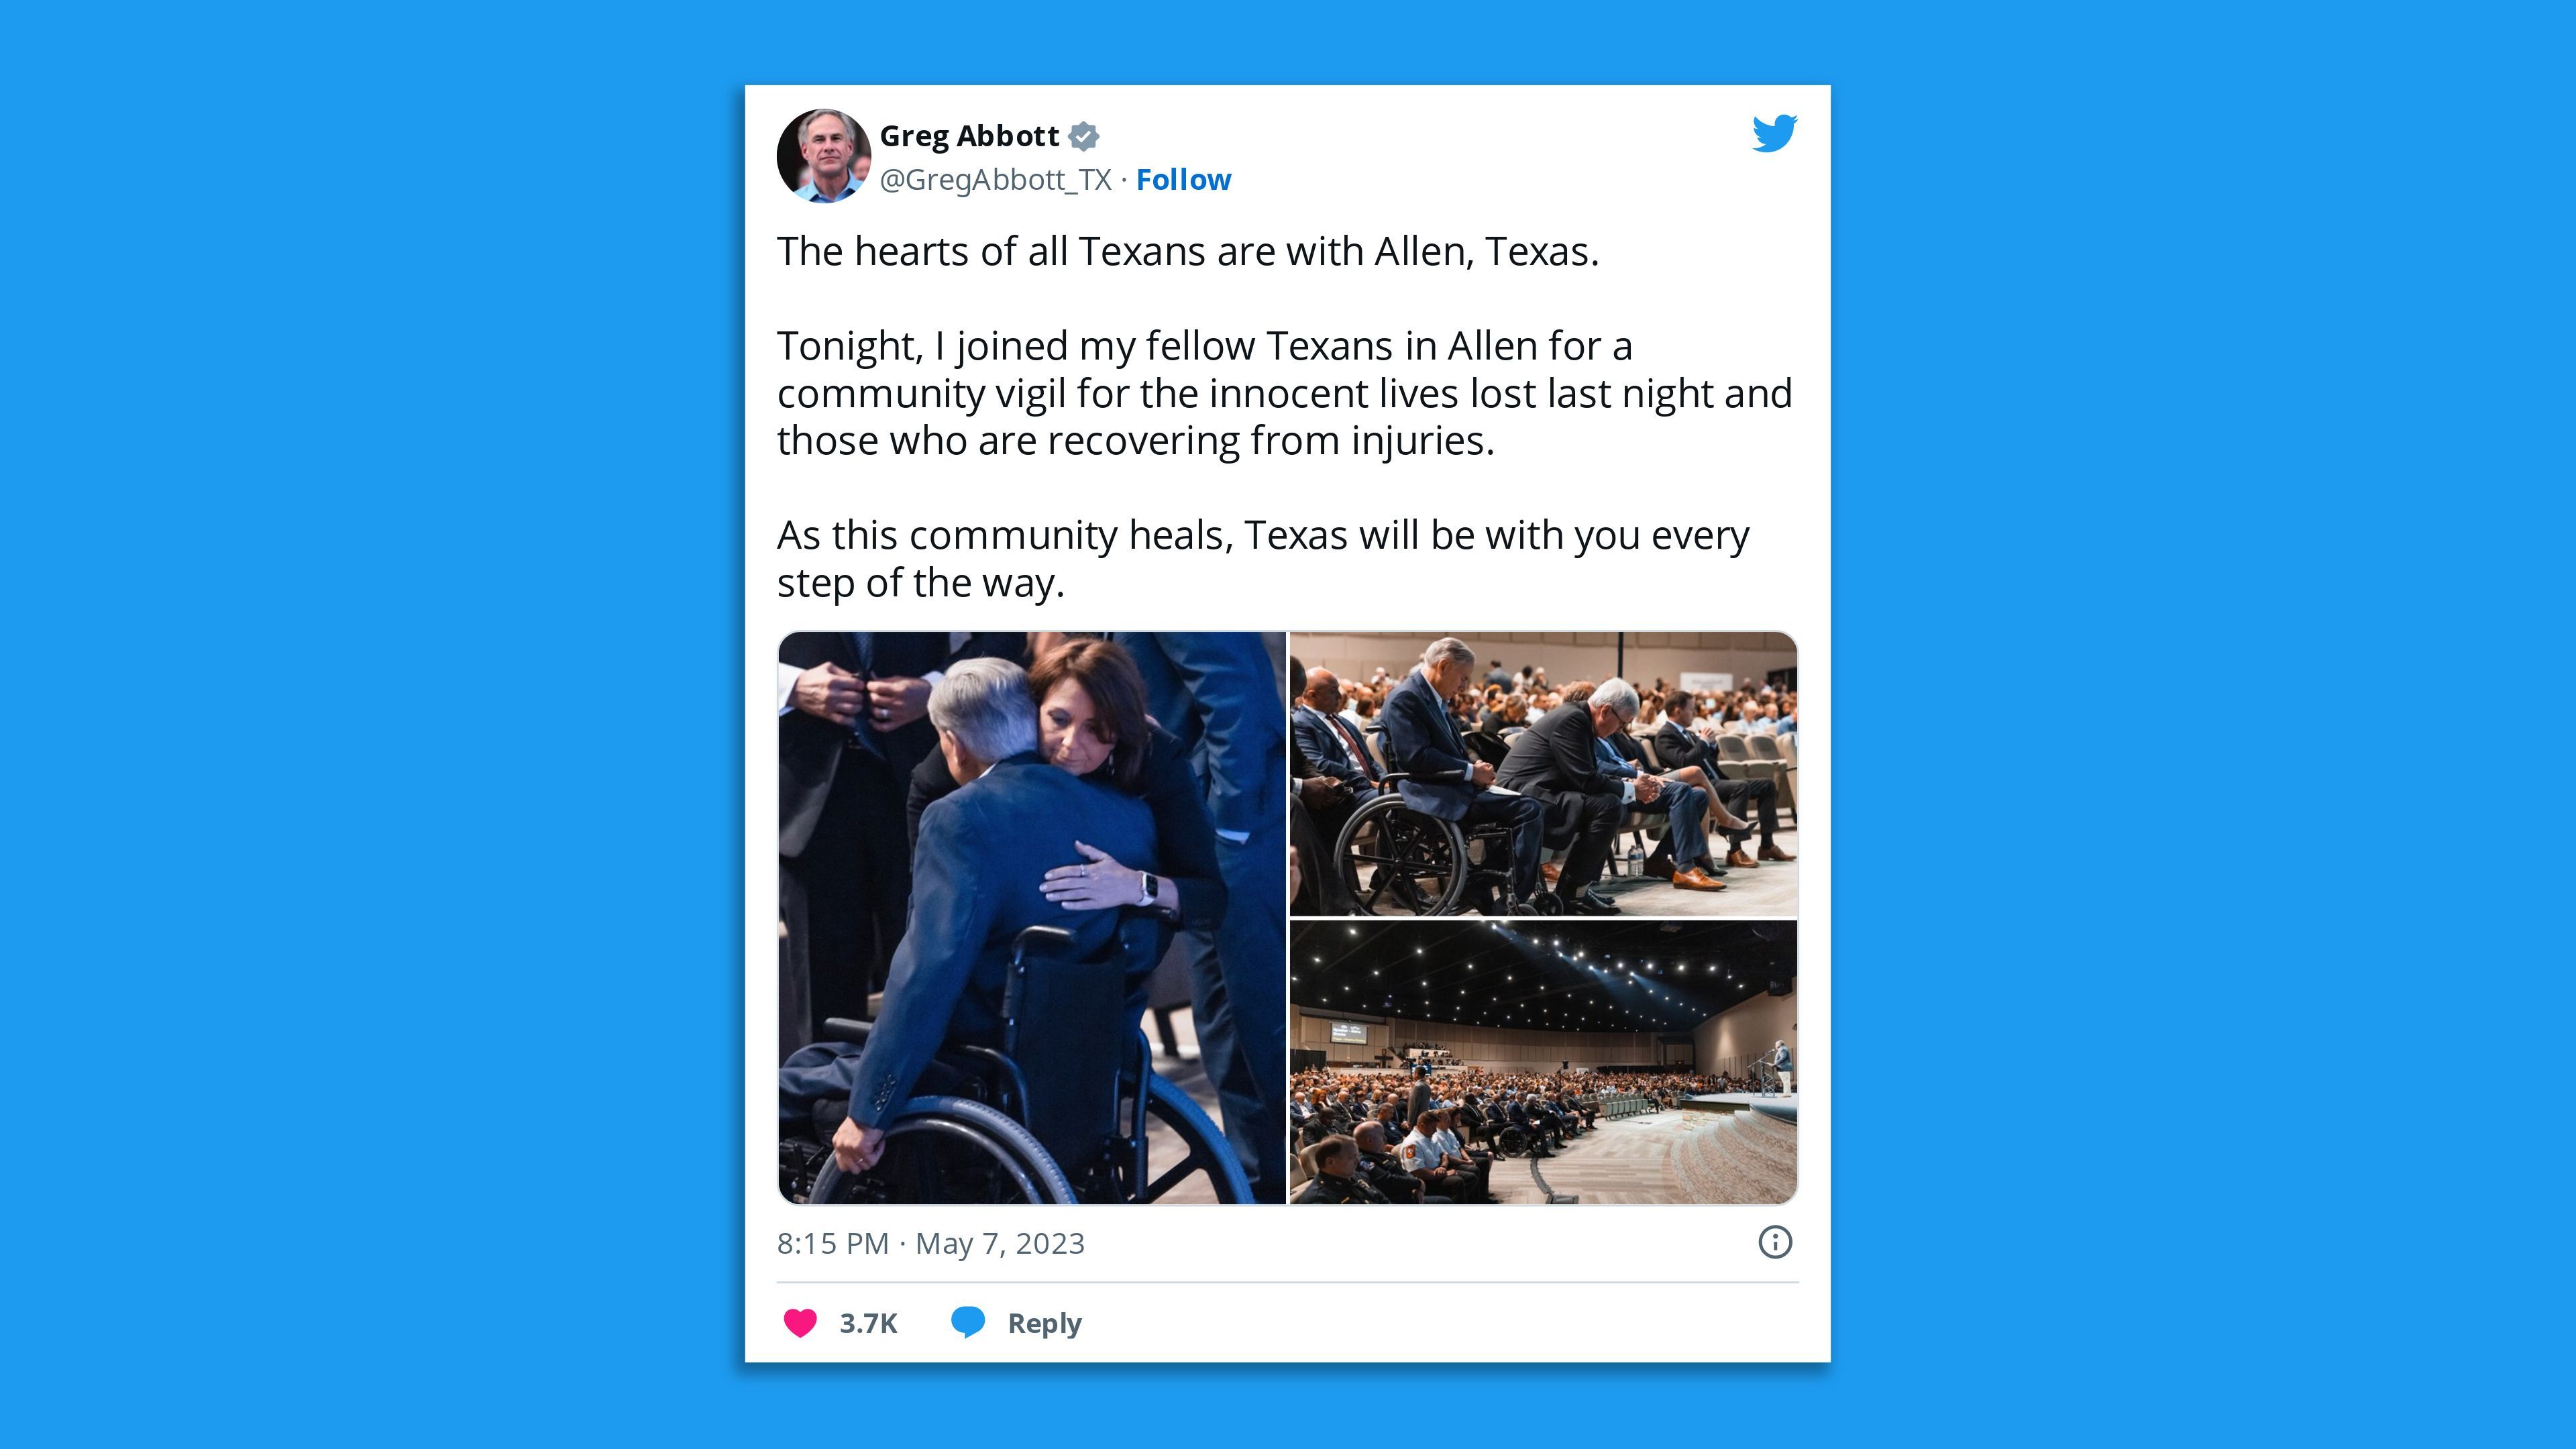 A screenshot of a tweet by Texas Gov. Greg Abbott showing photos of him at a vigil for the Allen shooting victims with the caption "The hearts of all Texans are with Allen, Texas.  Tonight, I joined my fellow Texans in Allen for a community vigil for the innocent lives lost last night and those who are recovering from injuries.   As this community heals, Texas will be with you every step of the way."